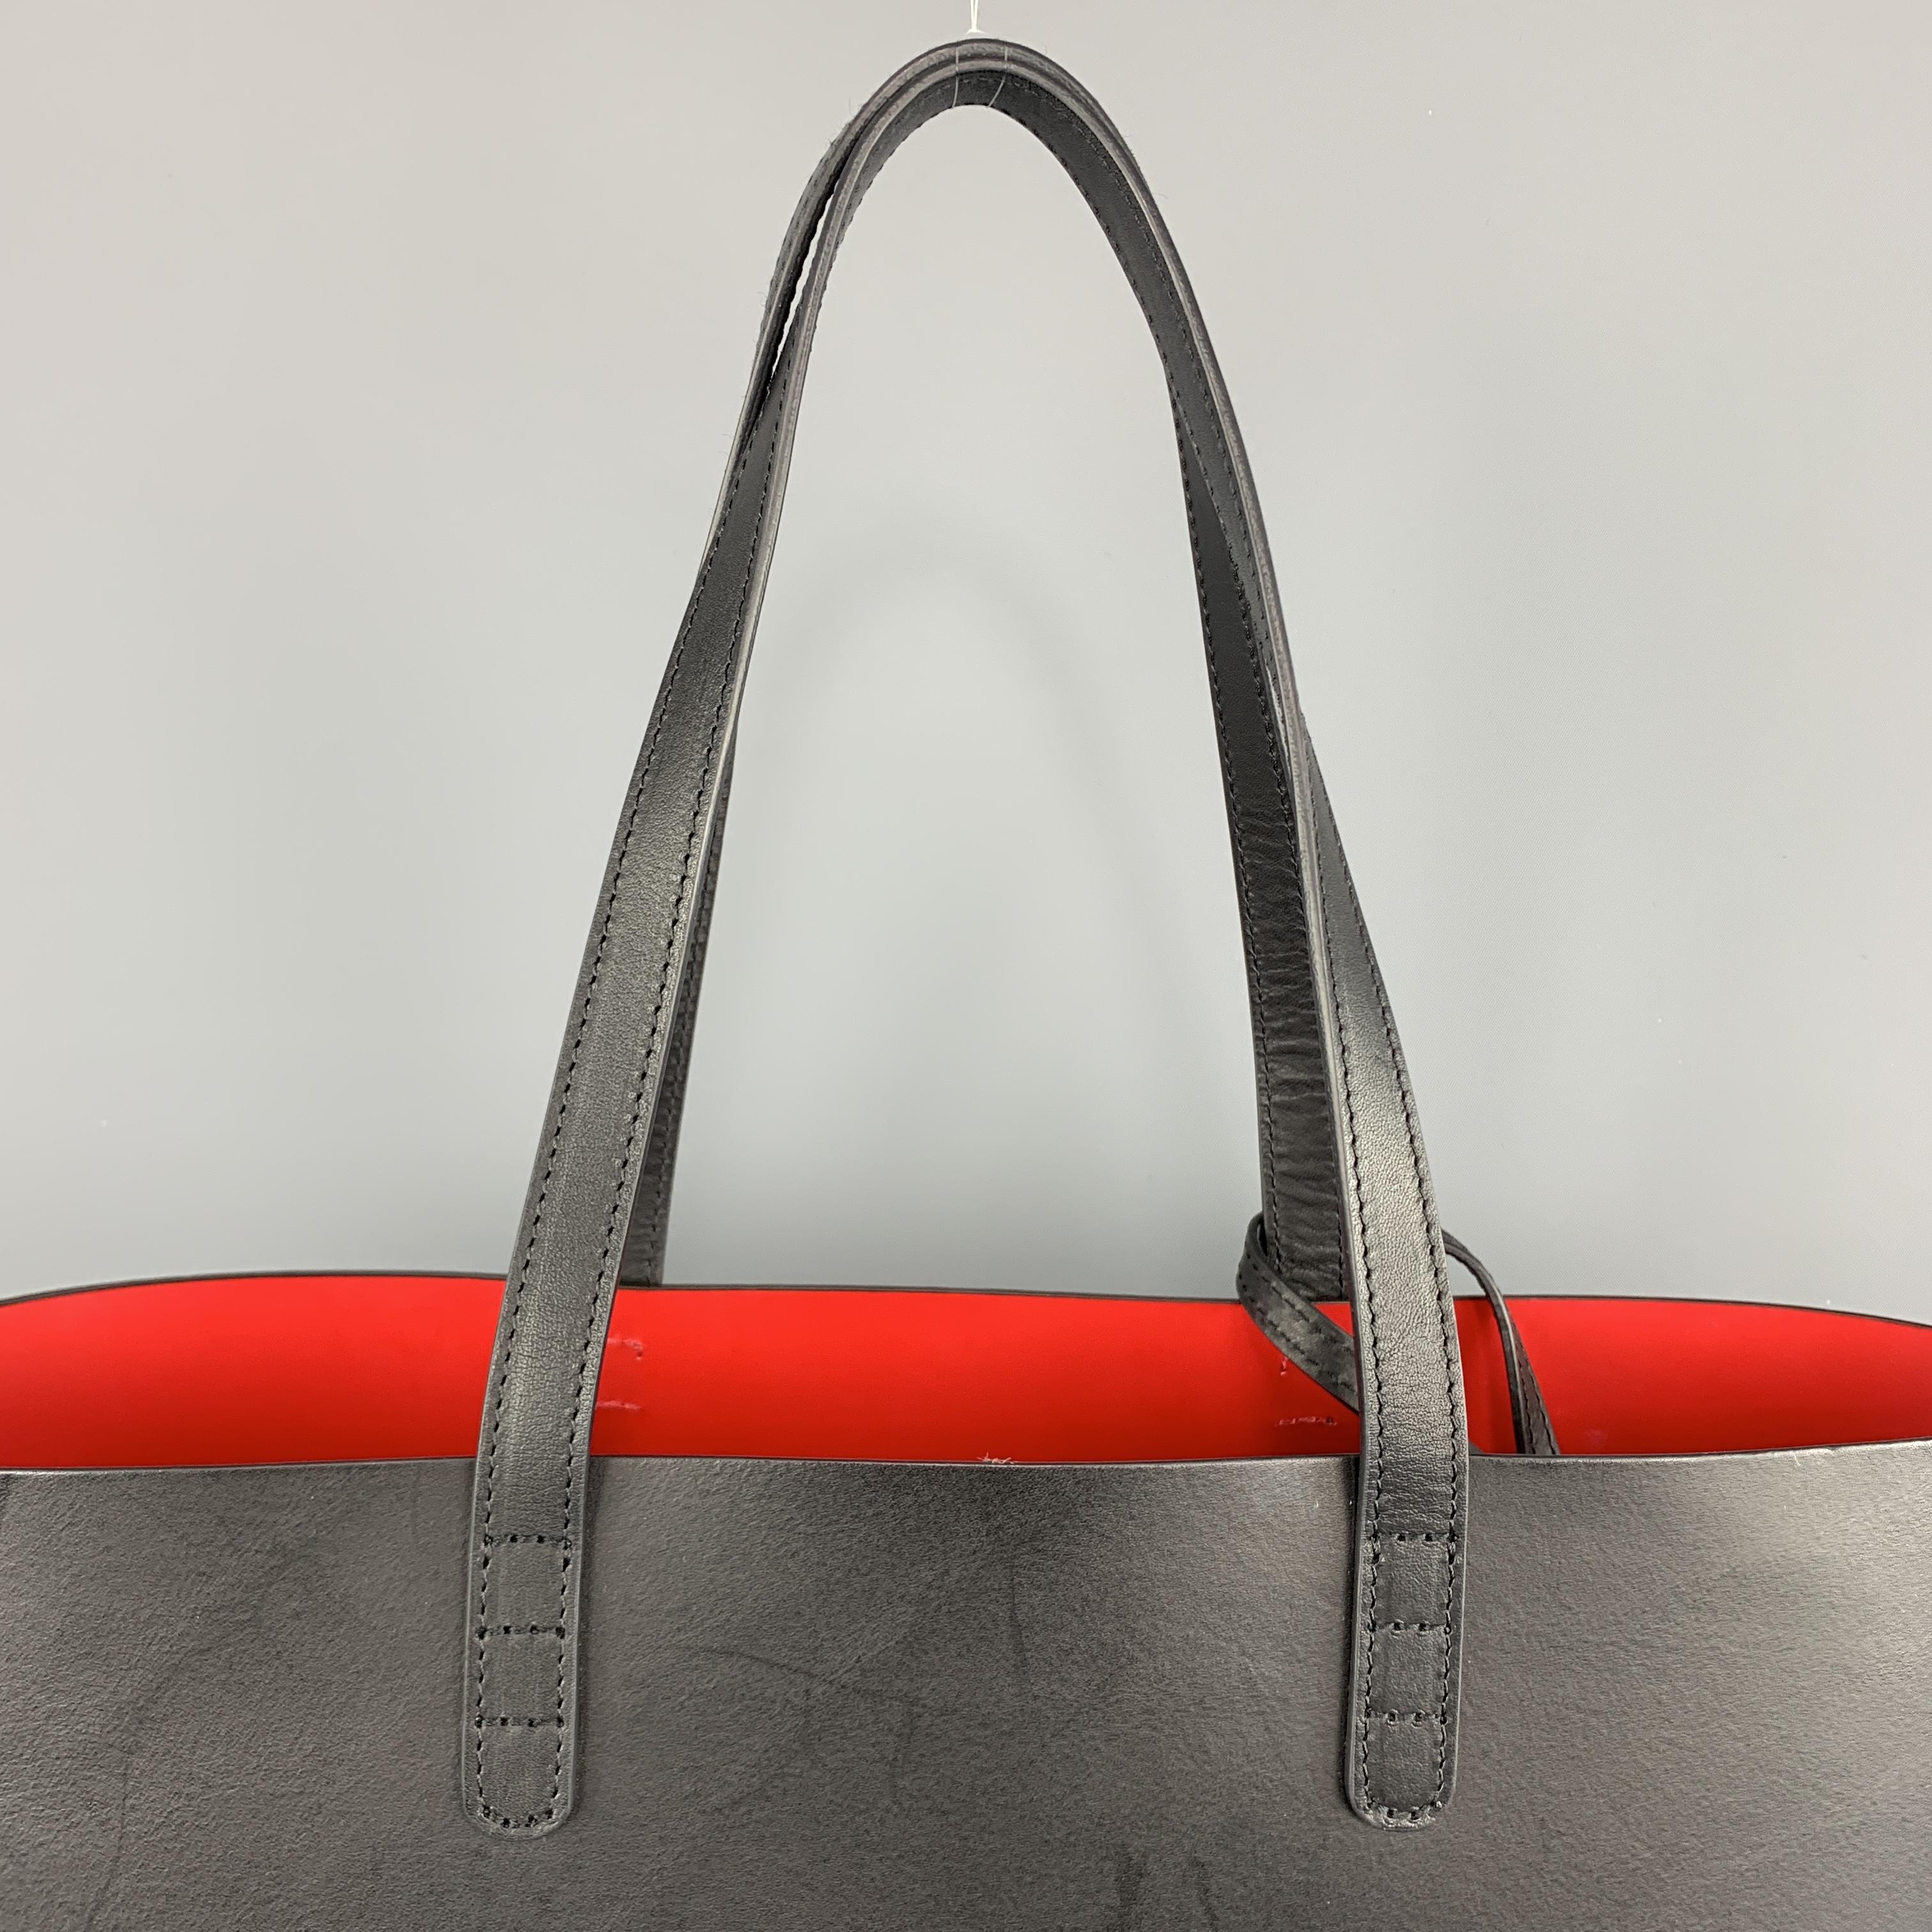 MANSUR GAVRIEL Tote bag comes in a smooth solid black leather, with a red interior, thin straps at drop, and a detachable wallet. Wear. Made in Italy.
 
Very Good Pre-Owned Condition.
 
Measurements:
Length: 15 in.
Width: 5.5 in.
Height: 9.5